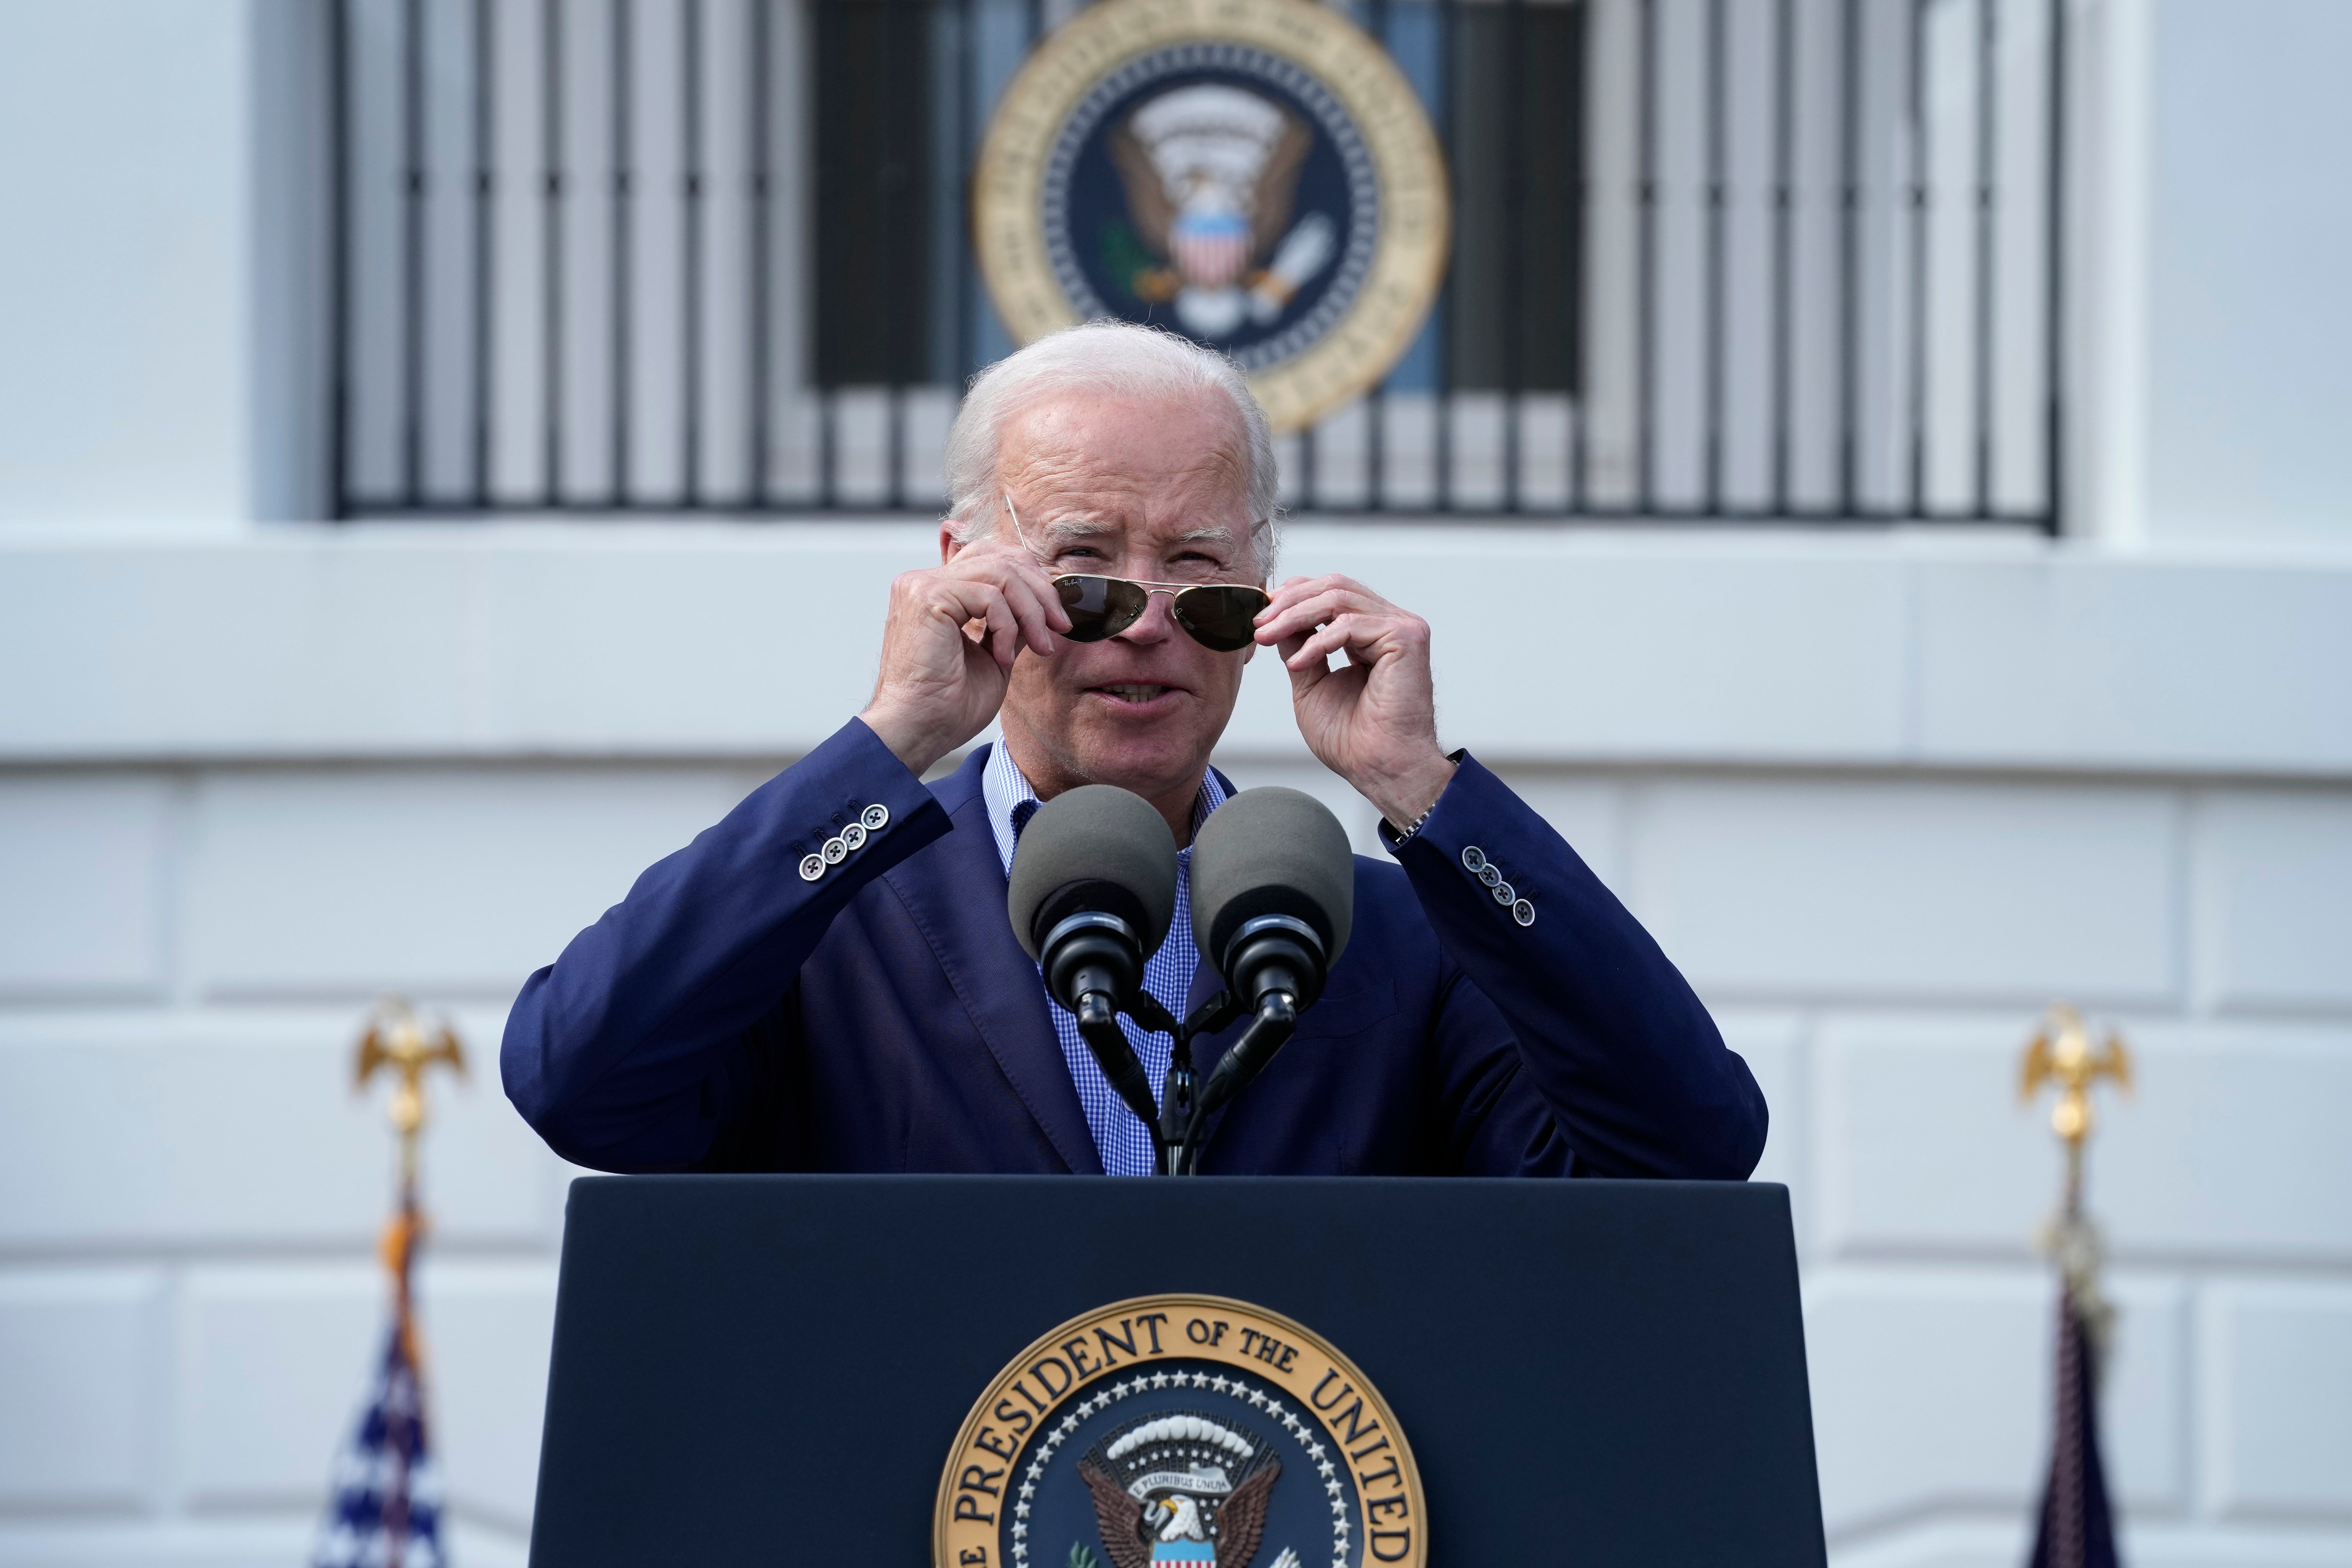 How Biden responds to this challenge will define his presidency and his legacy